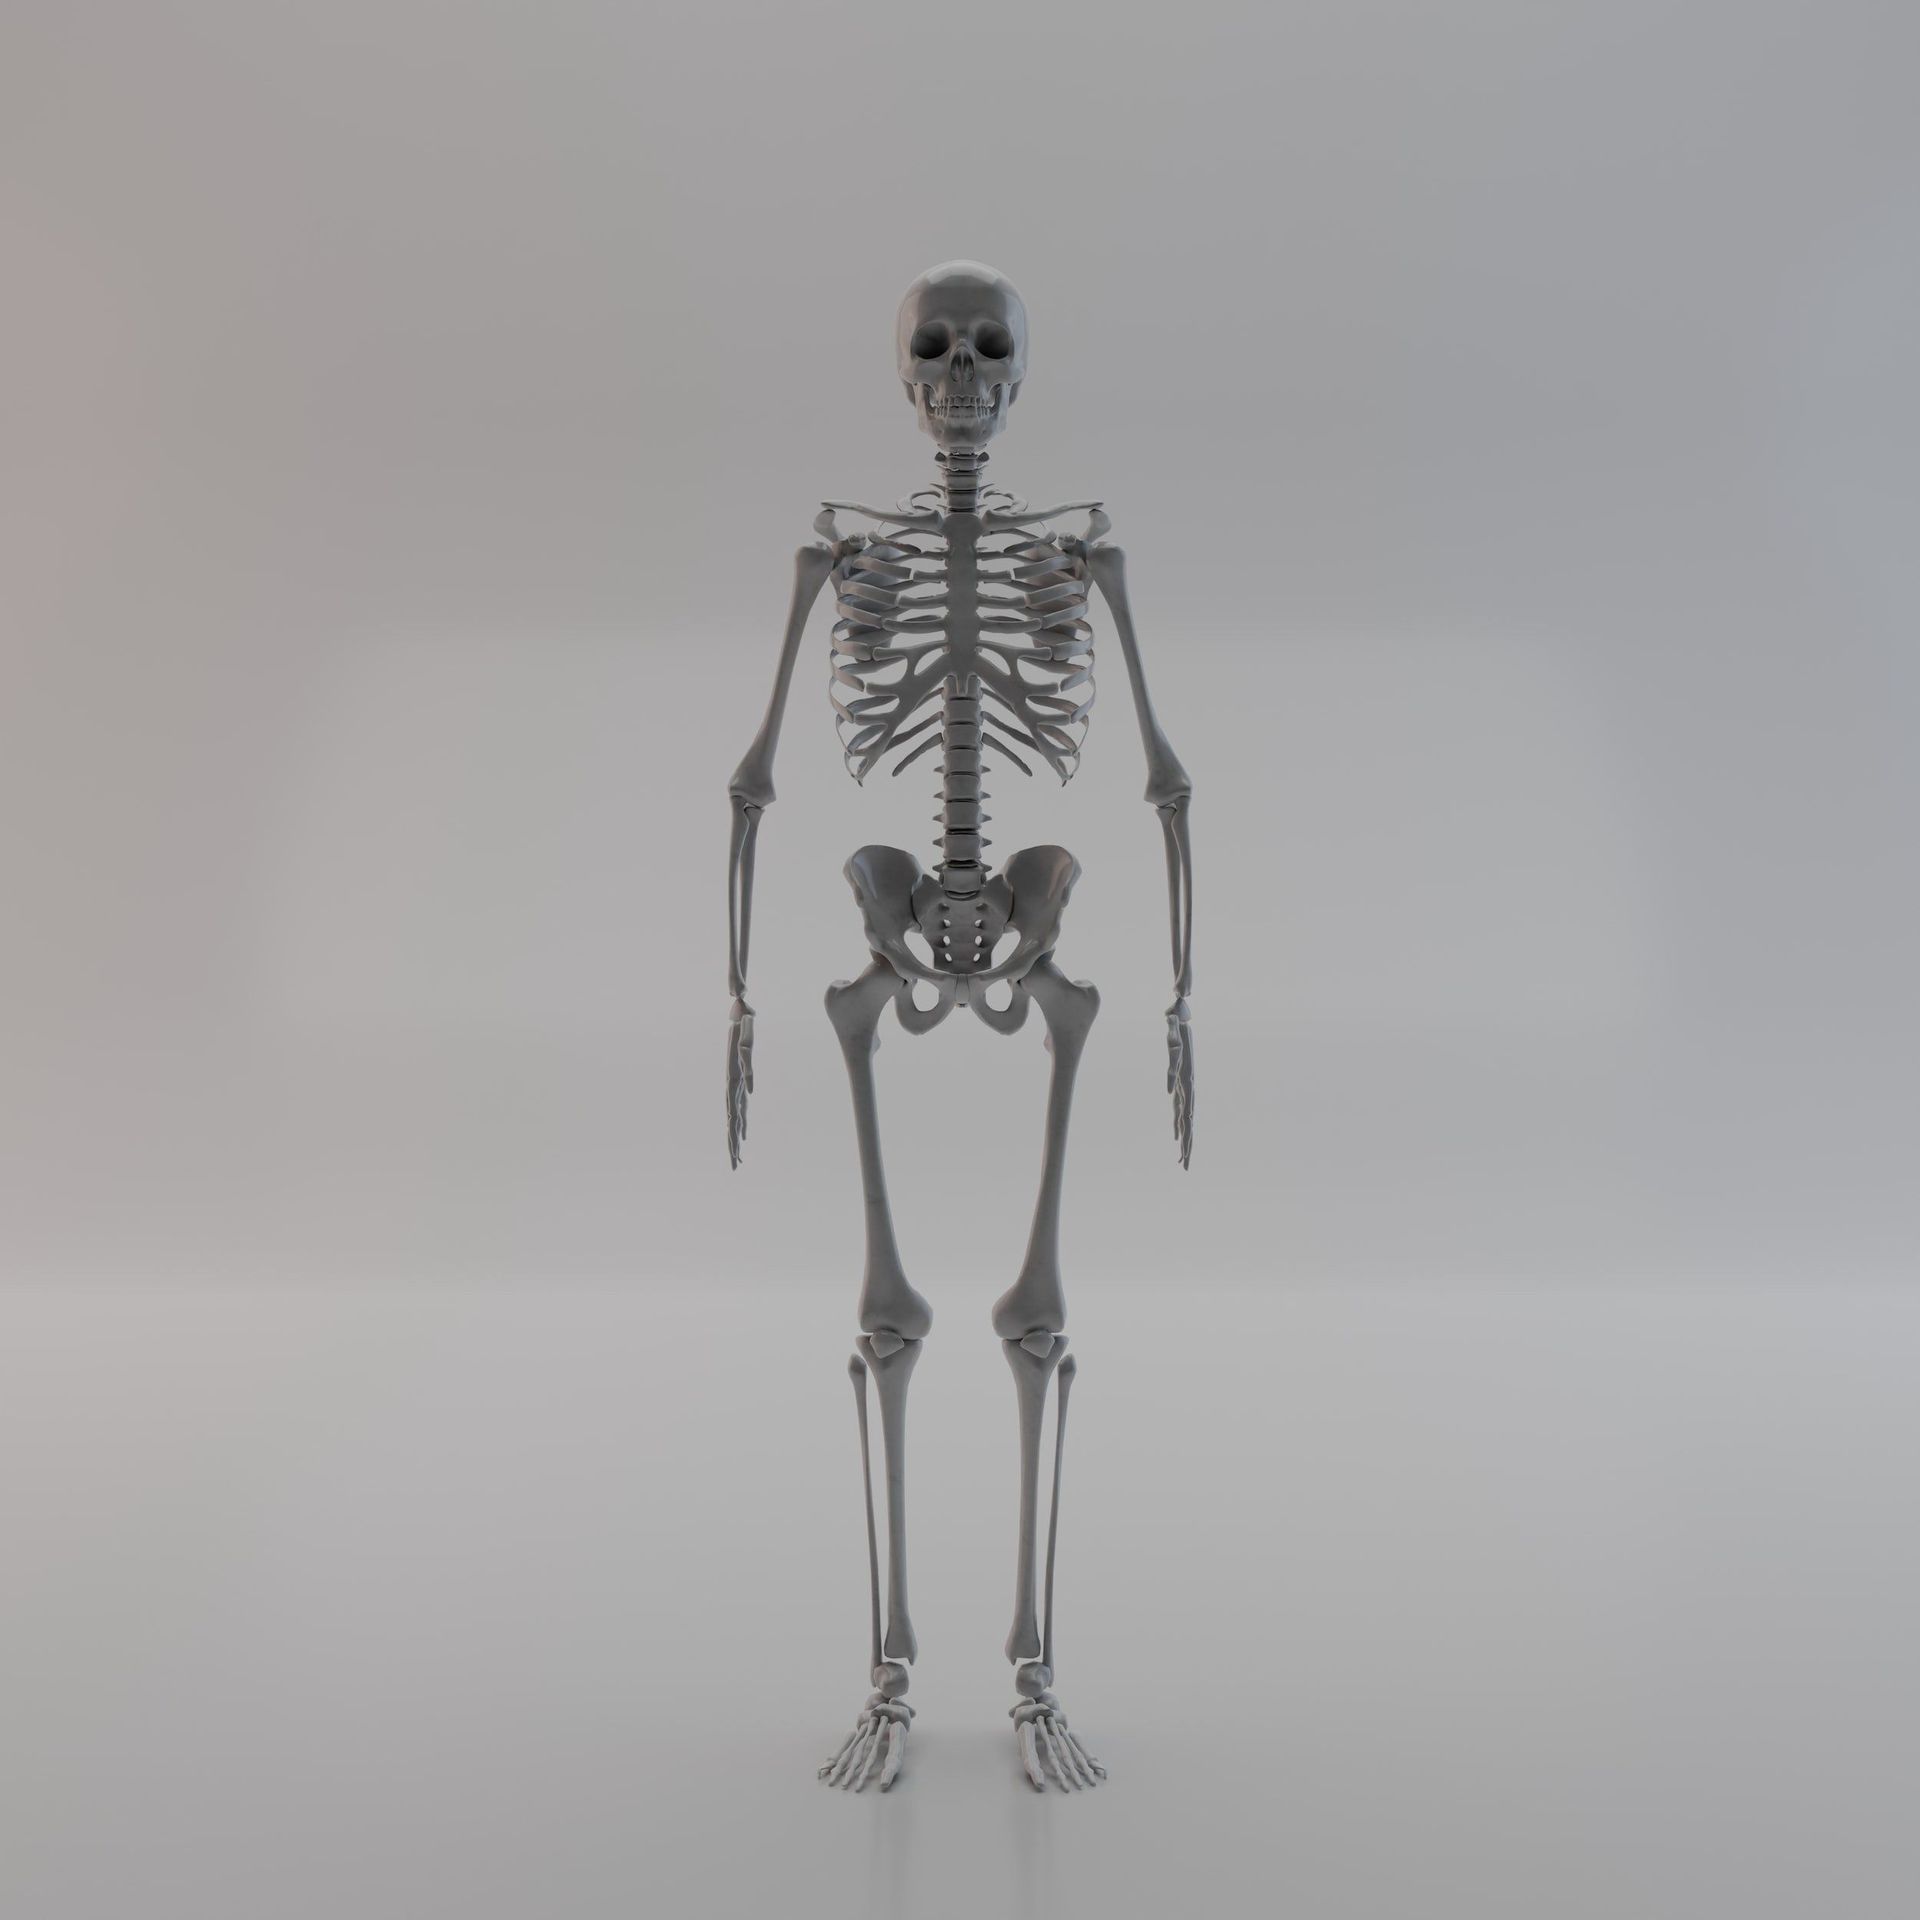 A 3d model of a human skeleton standing on a white surface.